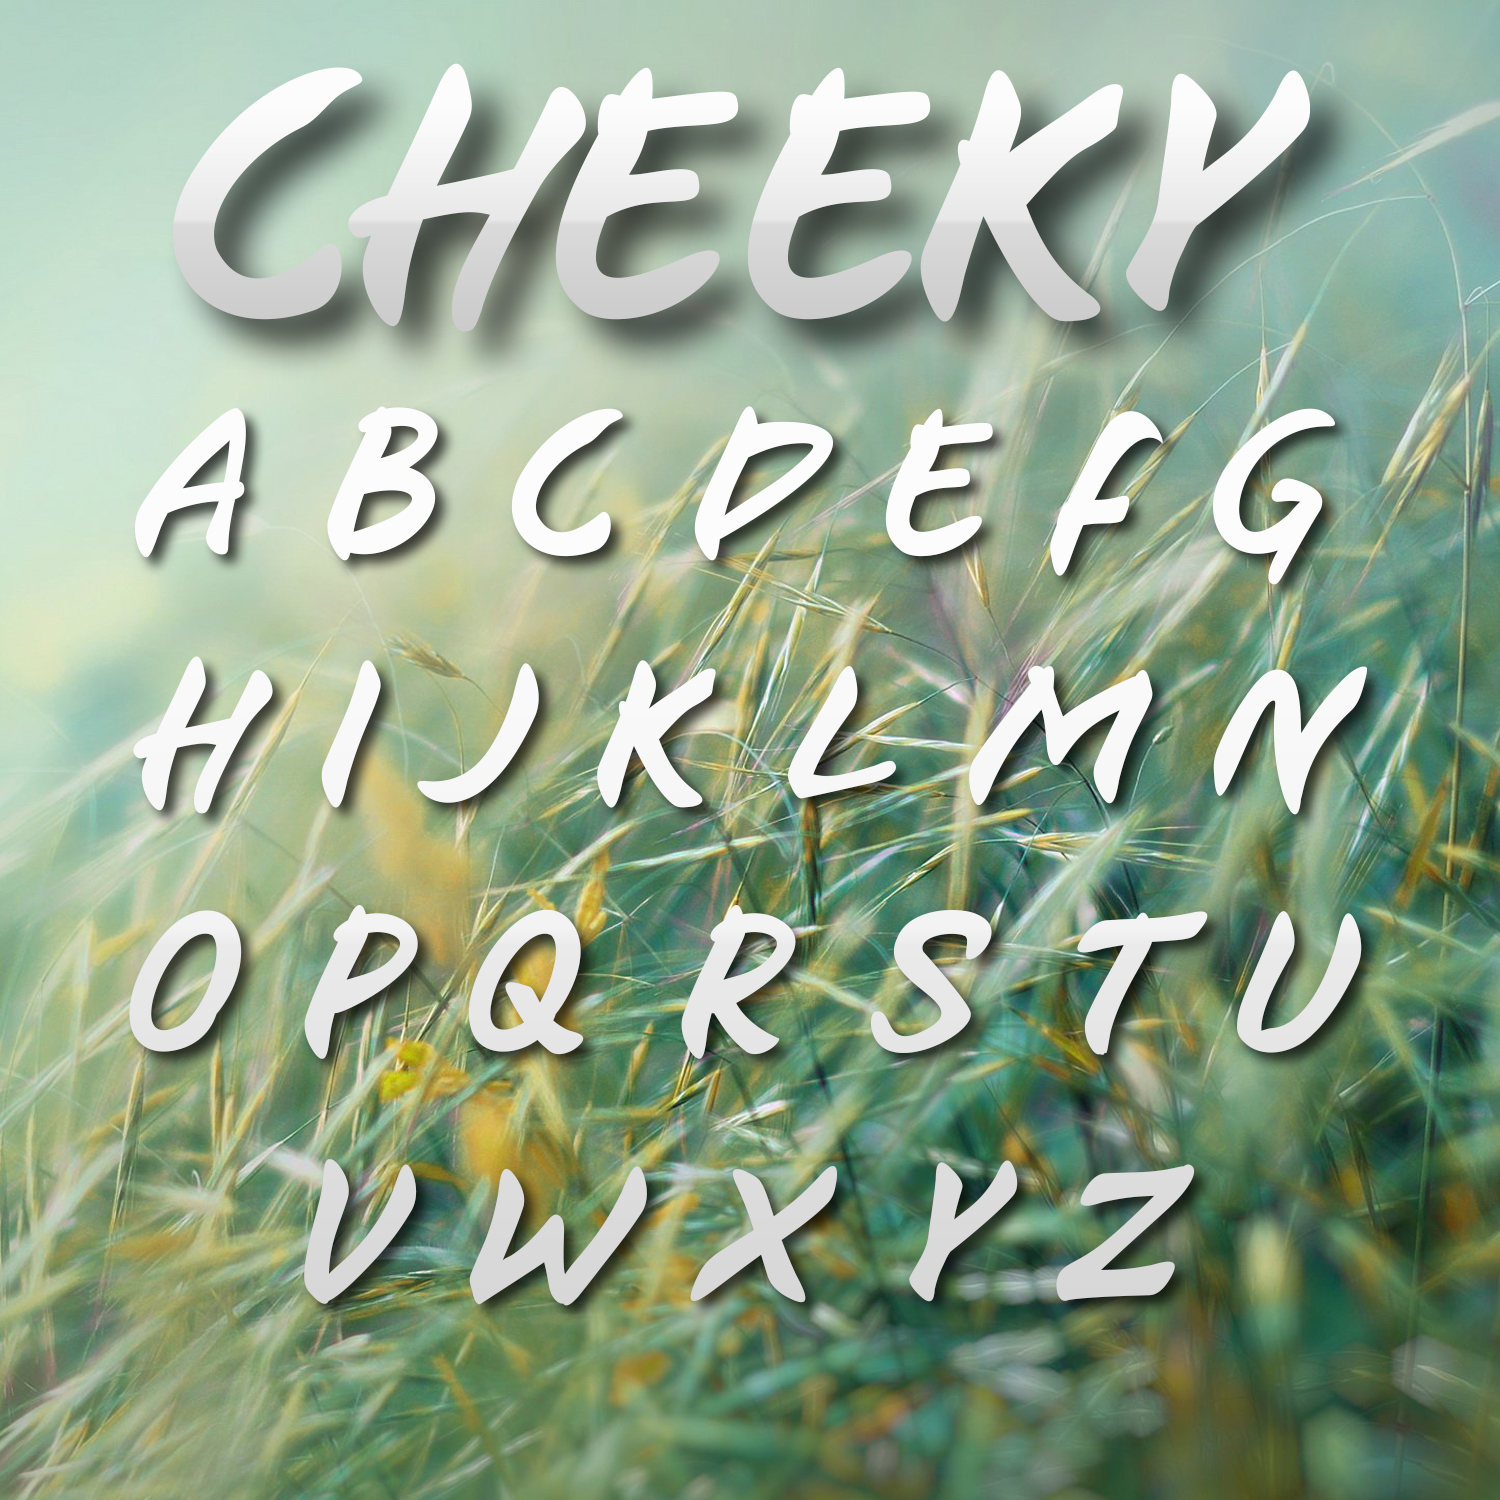 Featured alphabet in font style on a green background.